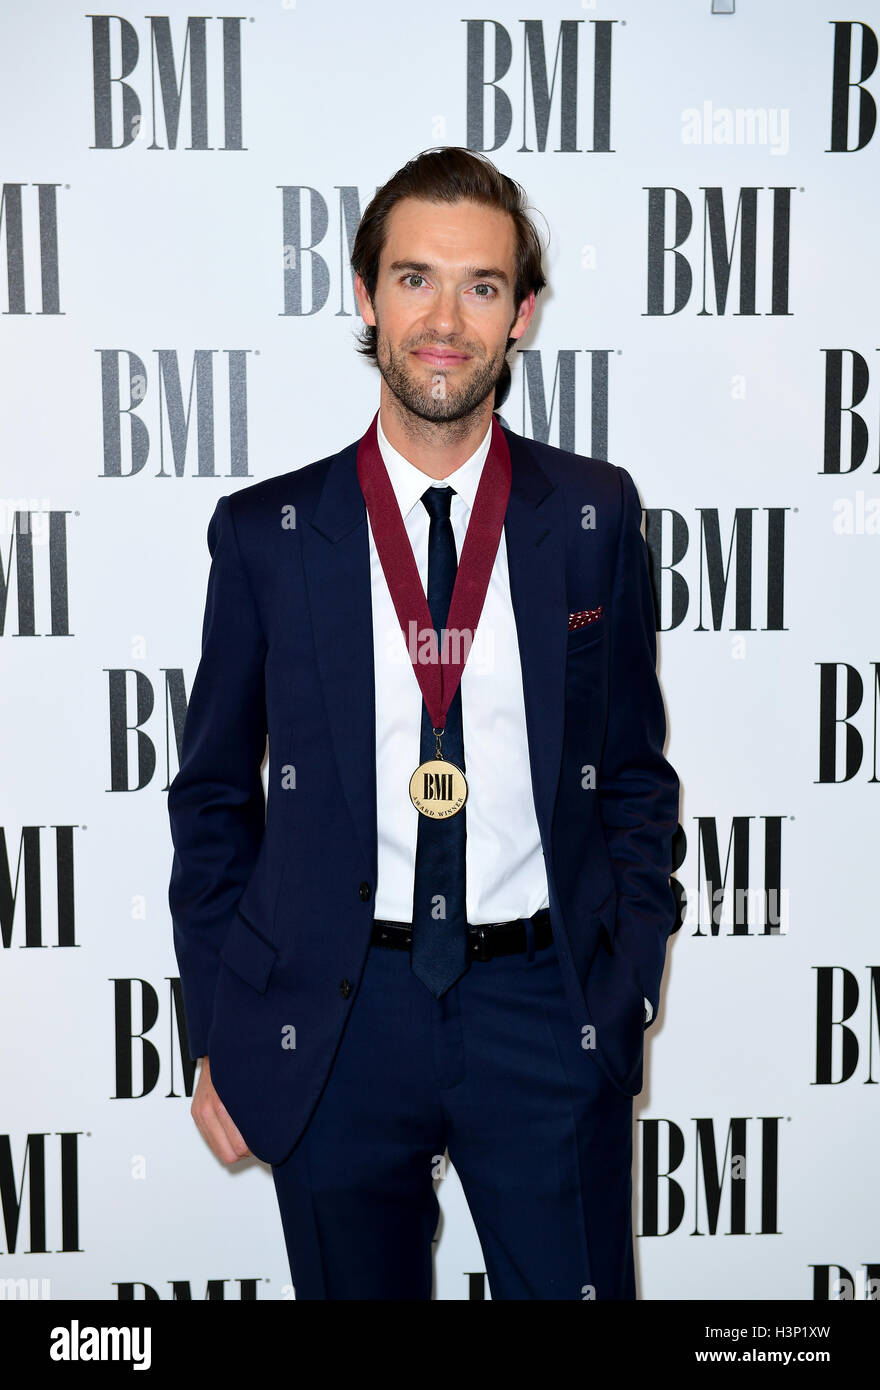 Sean Douglas attending the BMI London Awards at the Dorchester Hotel, London. PRESS ASSOCIATION Photo. Picture date: Monday 10th October, 2016. Photo credit should read: Ian West/PA Wire. Stock Photo